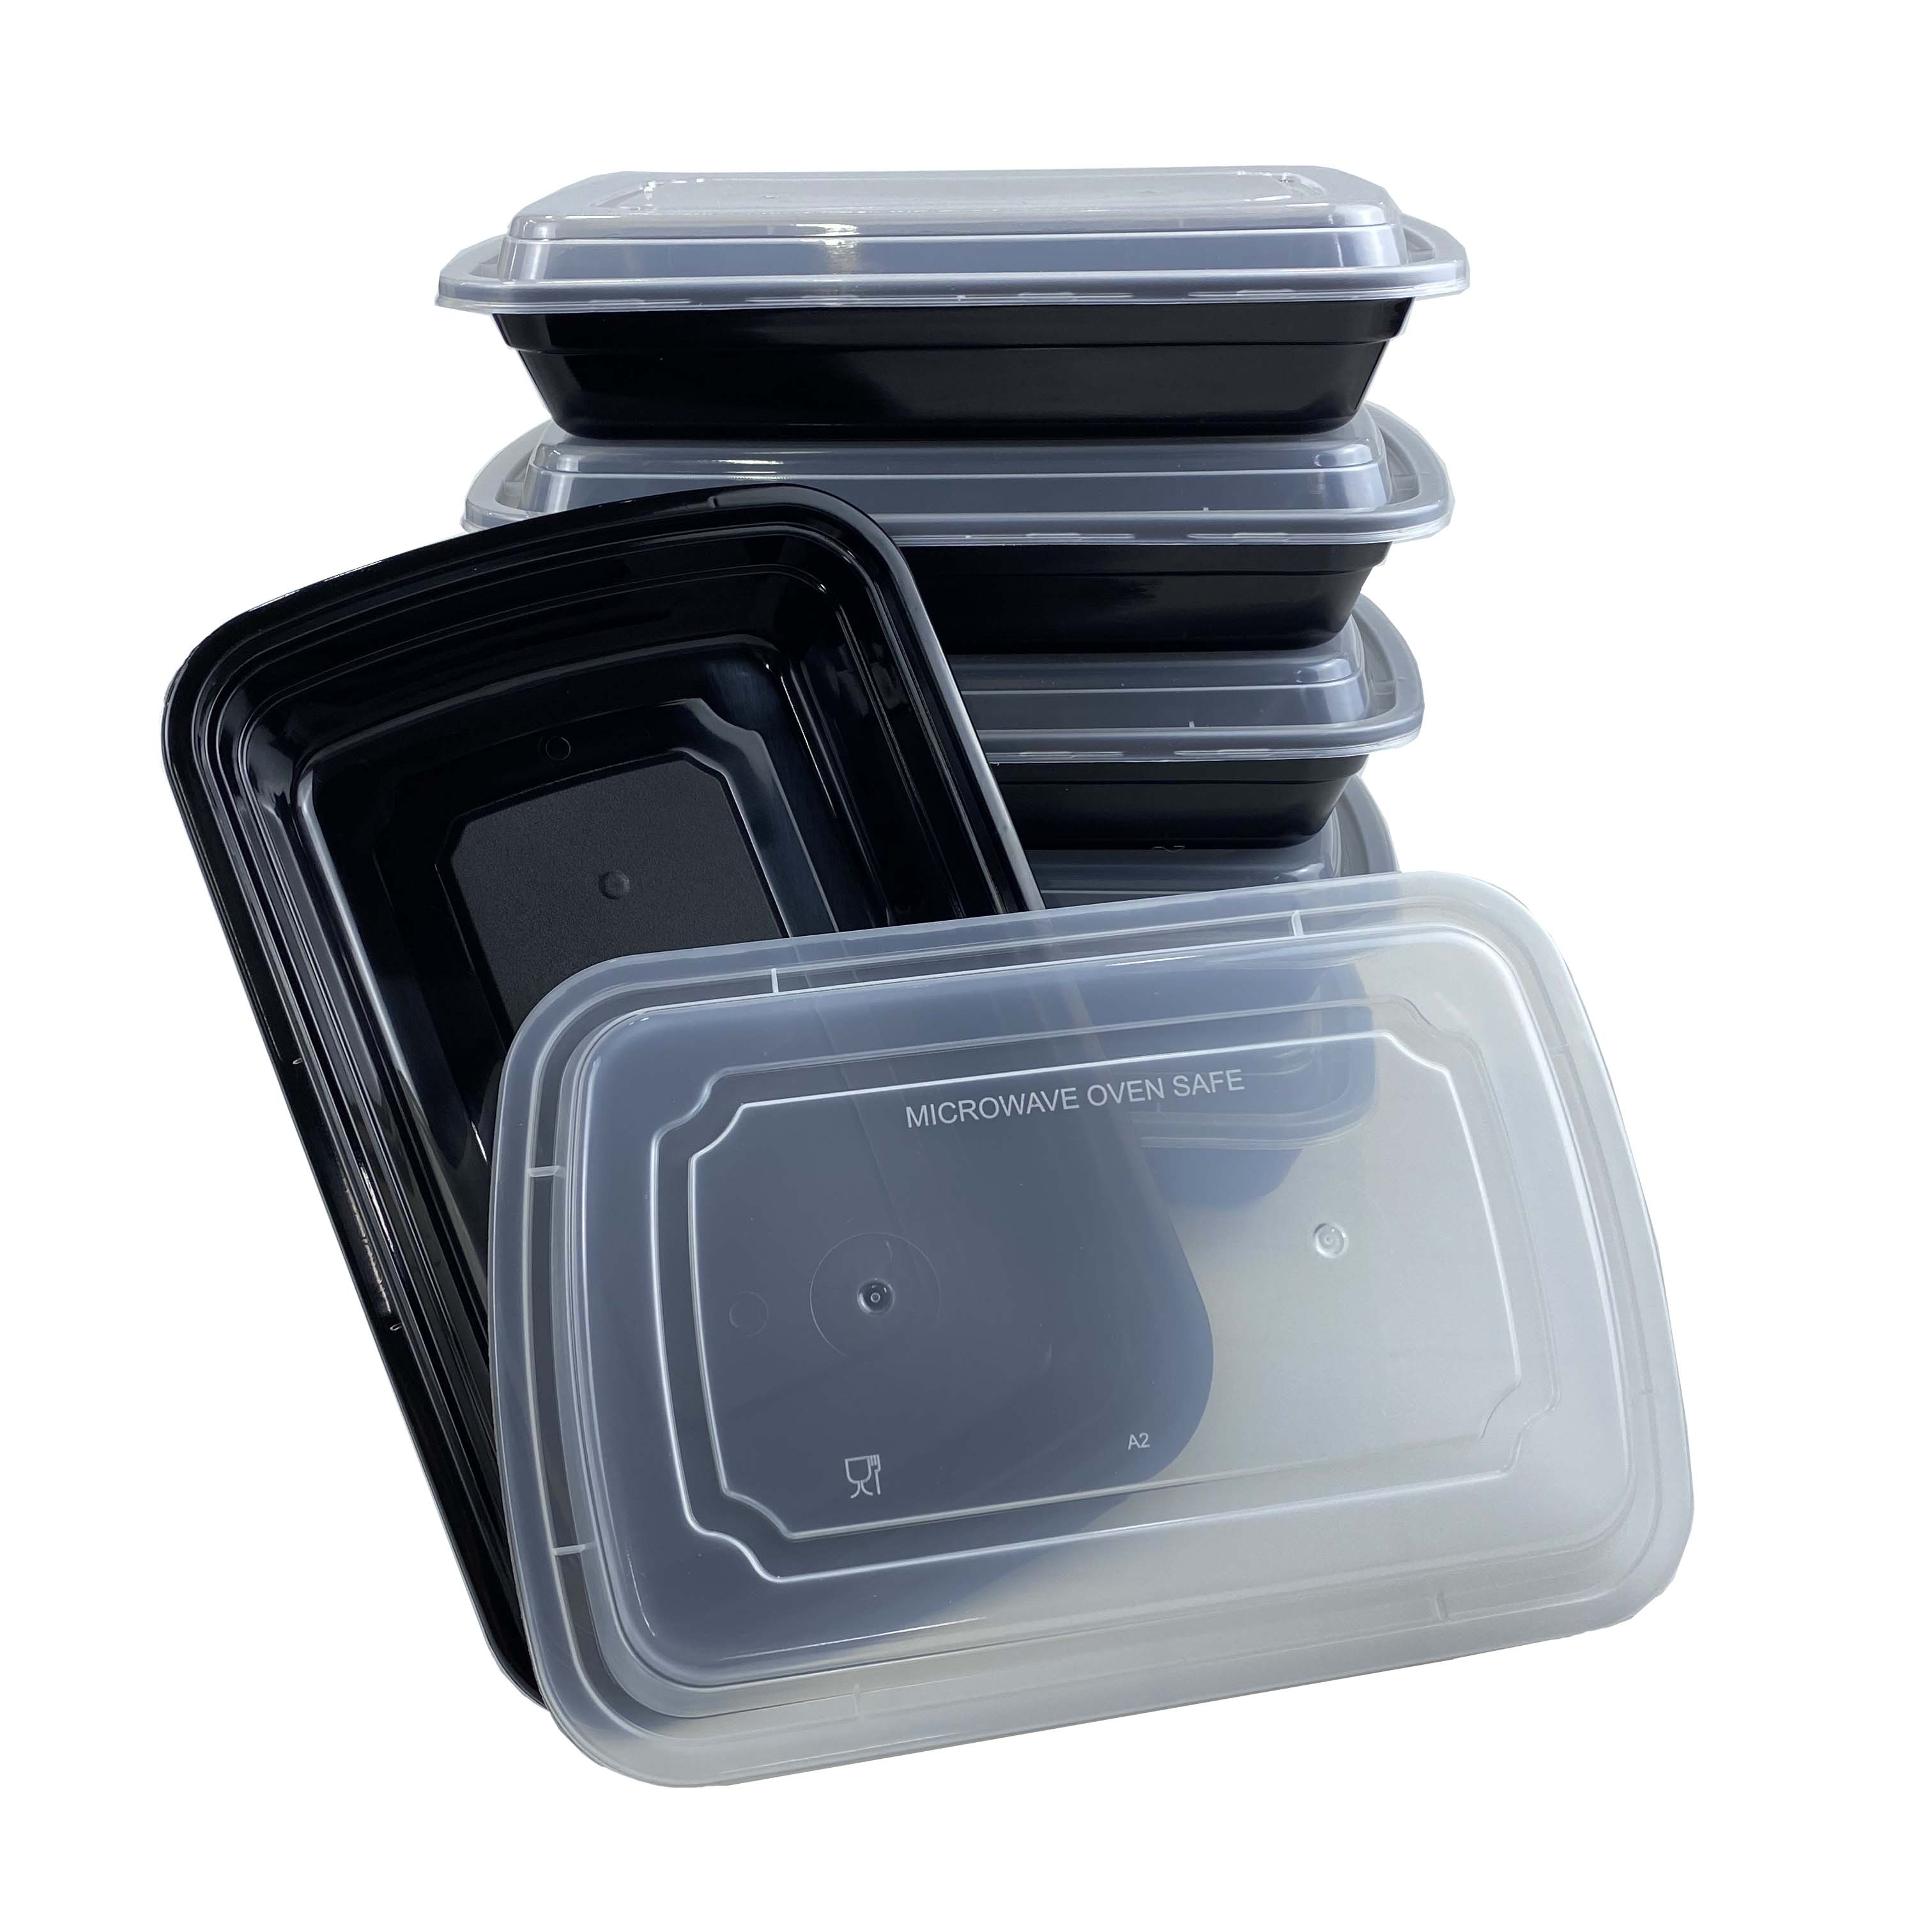 New disposable plastic food containers